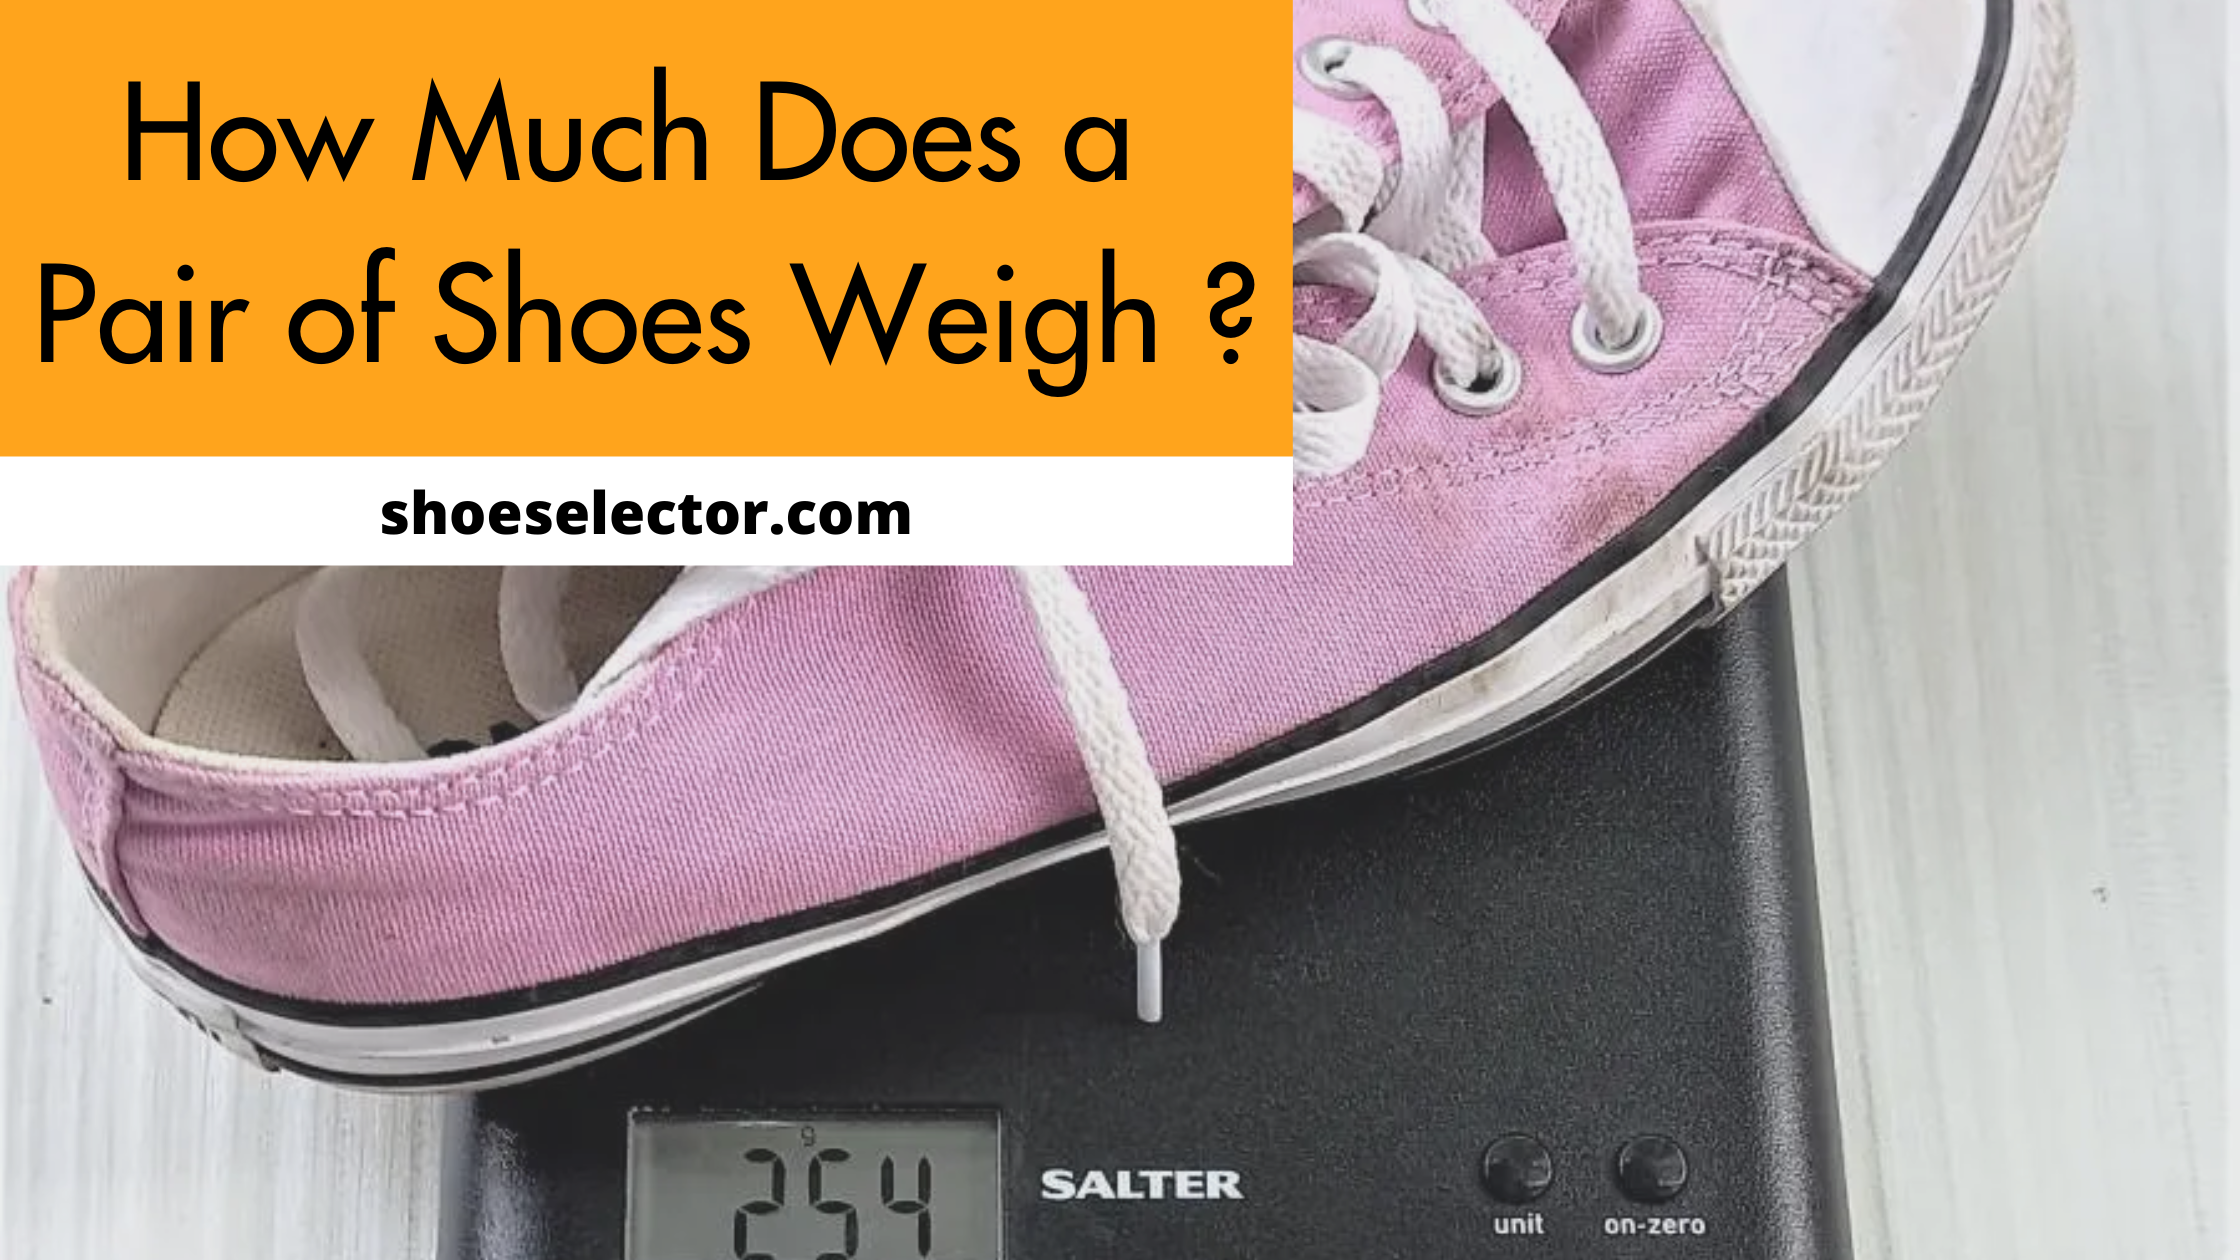 How Much Does a Pair of Shoes weigh? - Pro Guide